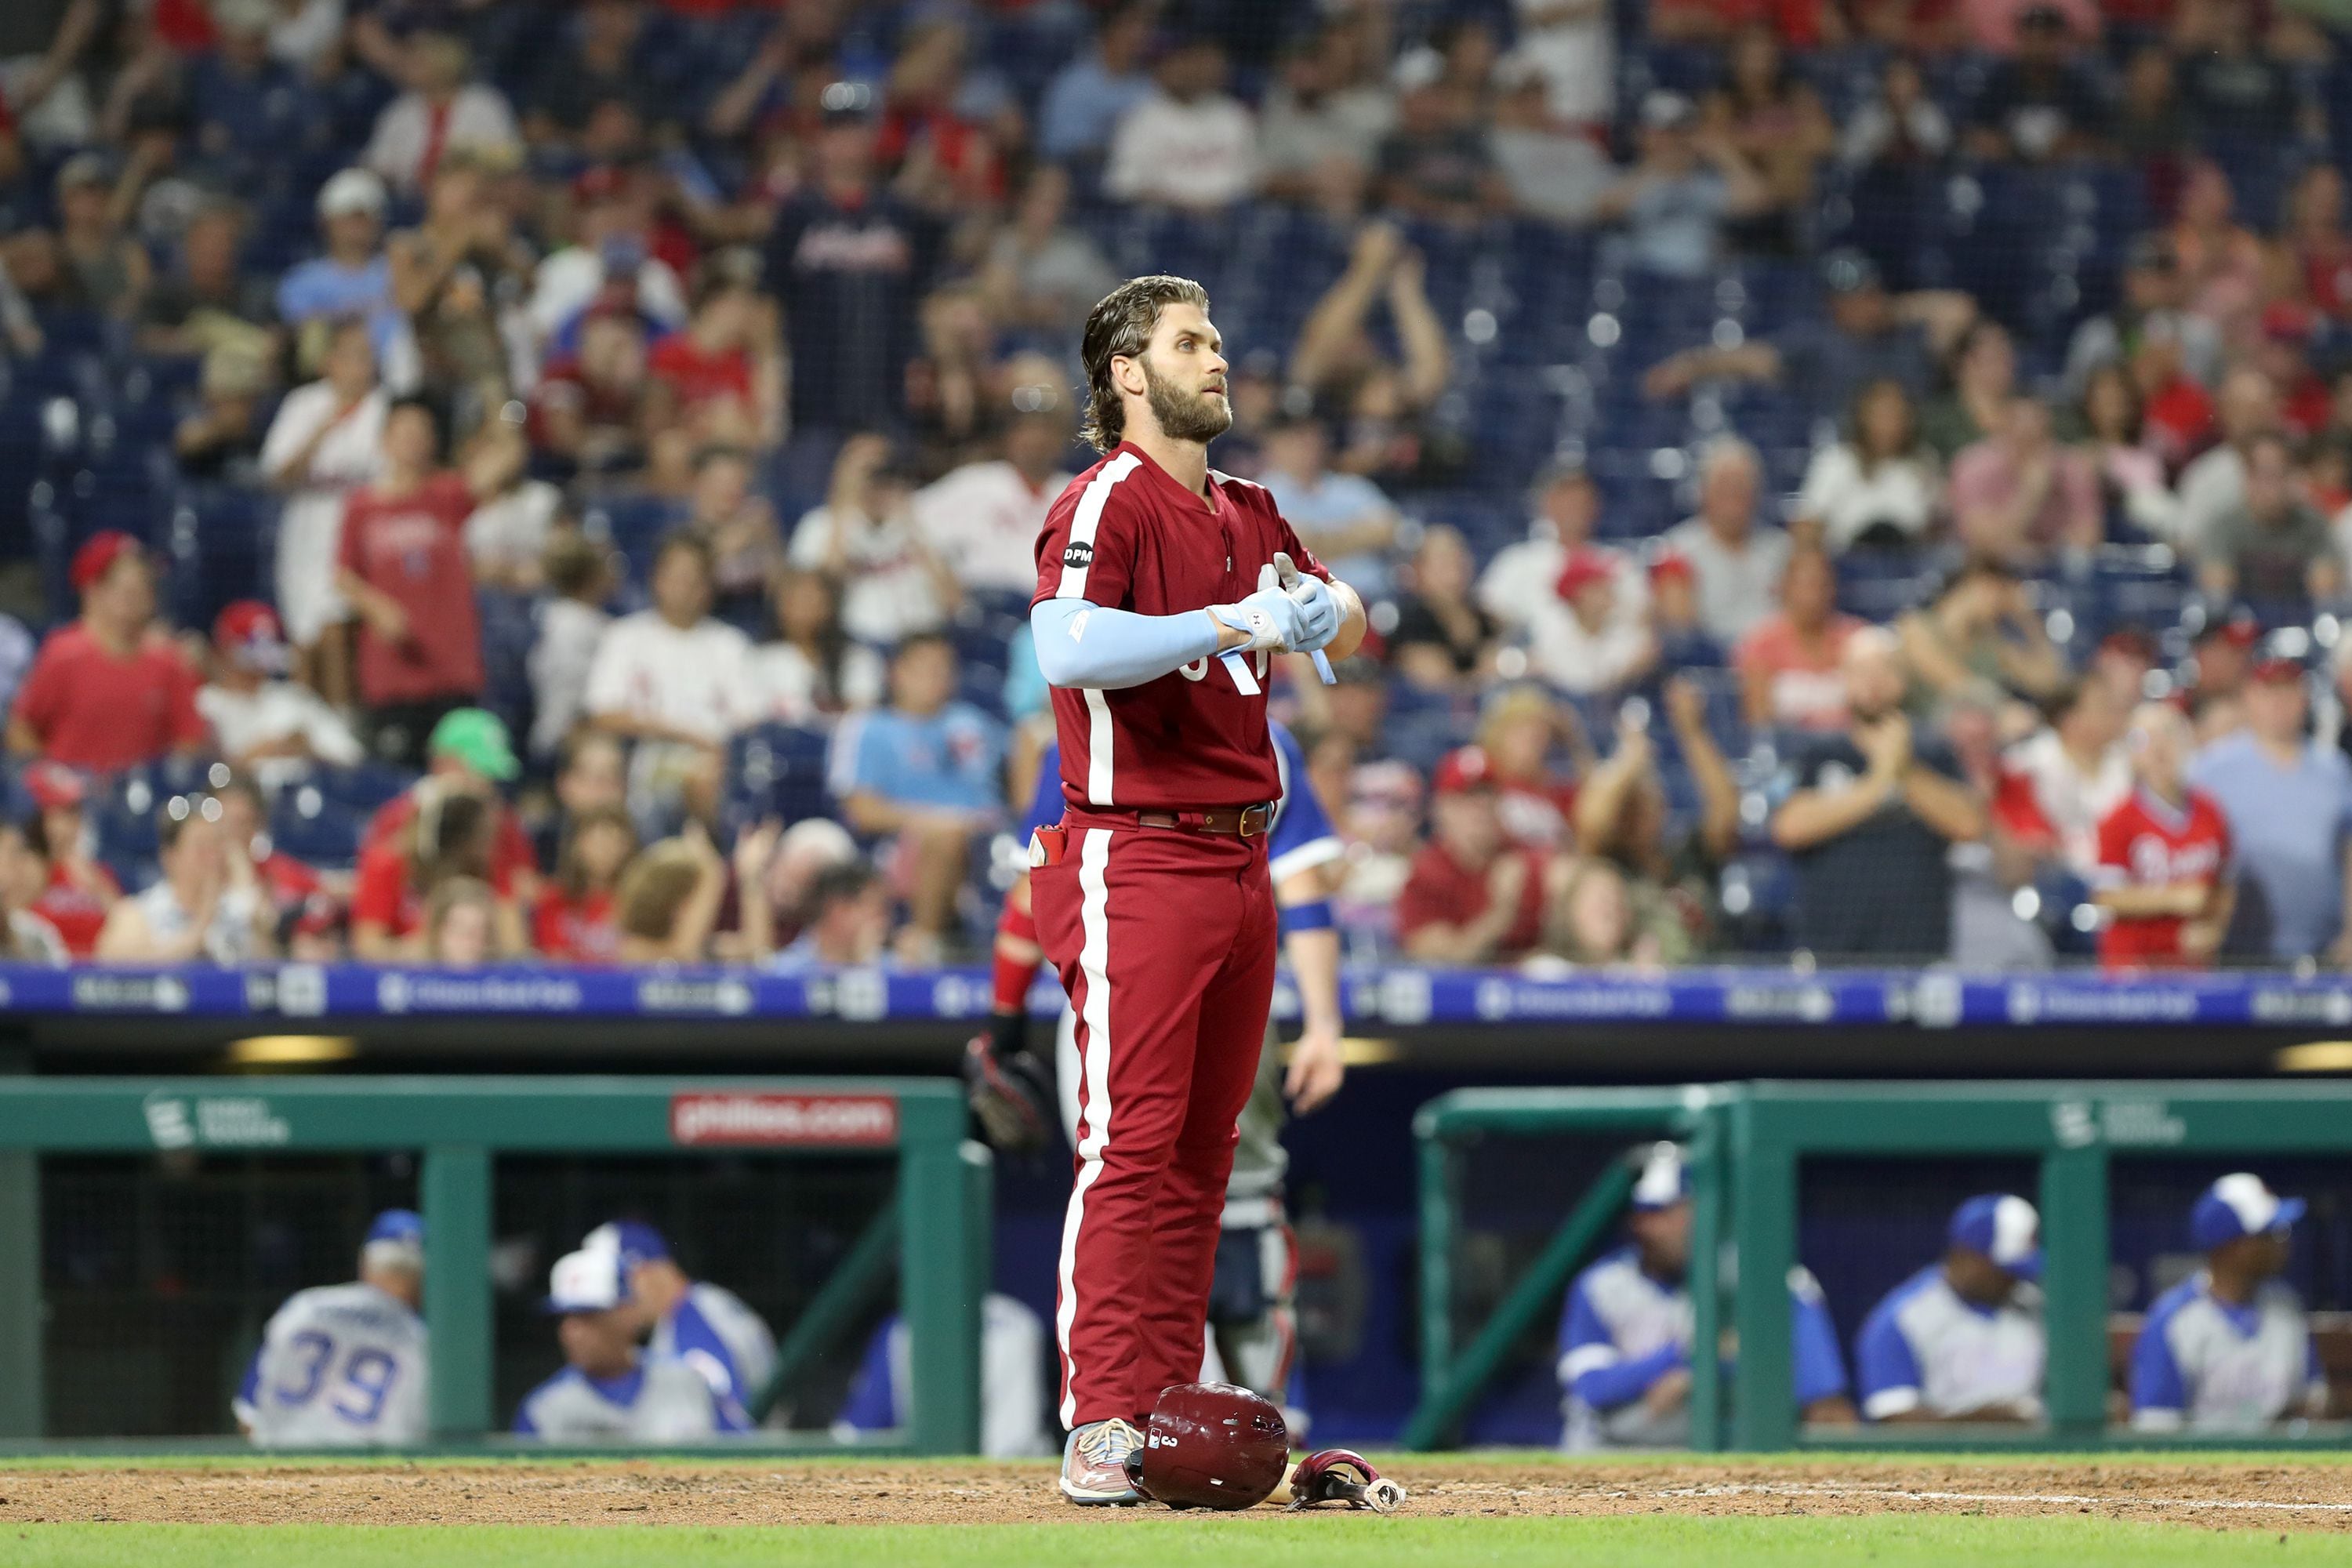 Phillies fall to Braves for embarrassing, ugly loss in burgundy